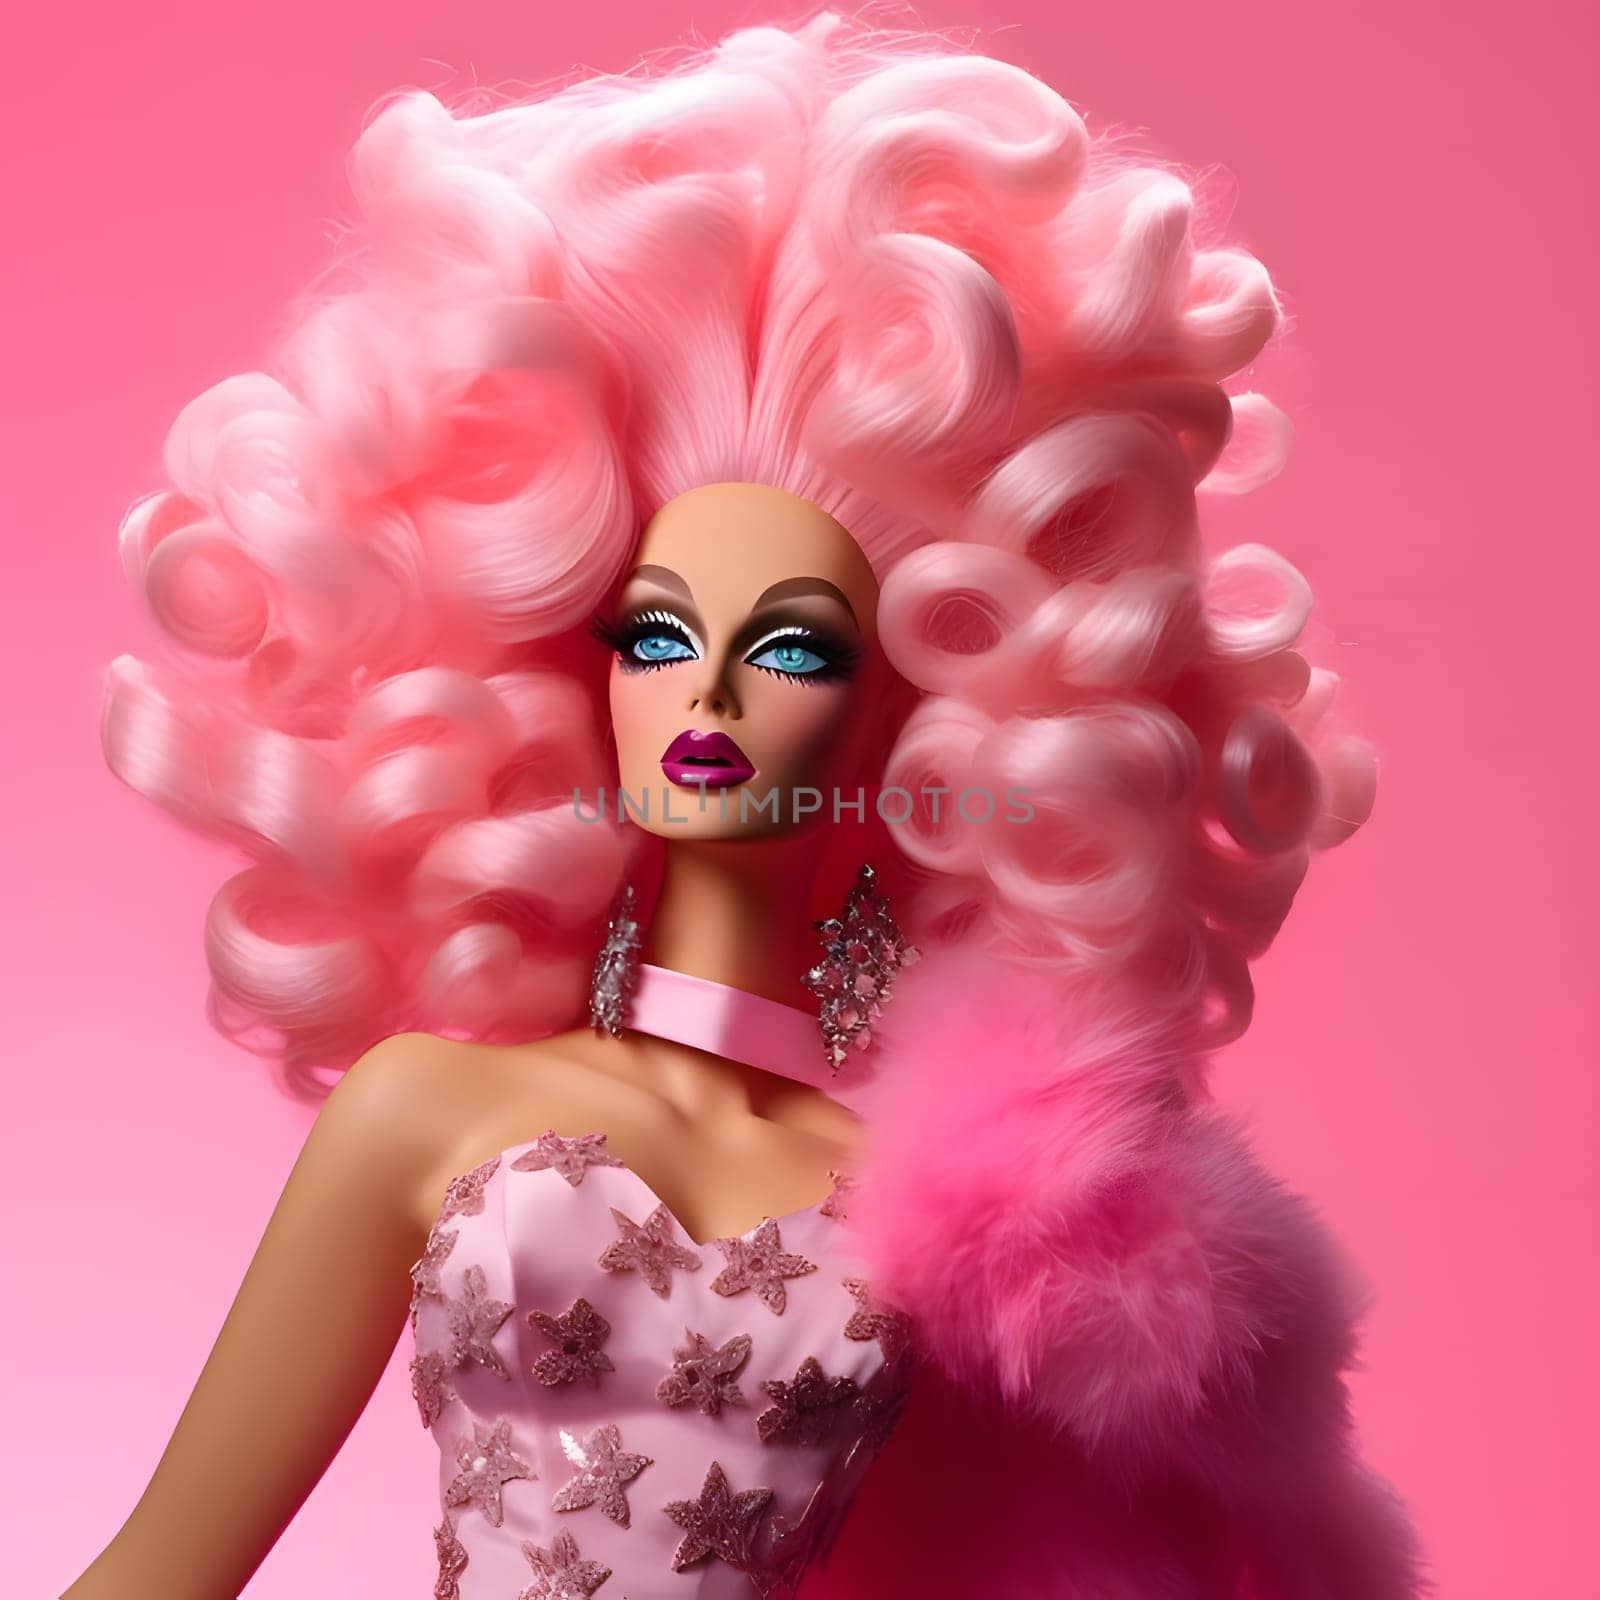 Caricature of barbie in pink outfit with huge hair.v by ThemesS